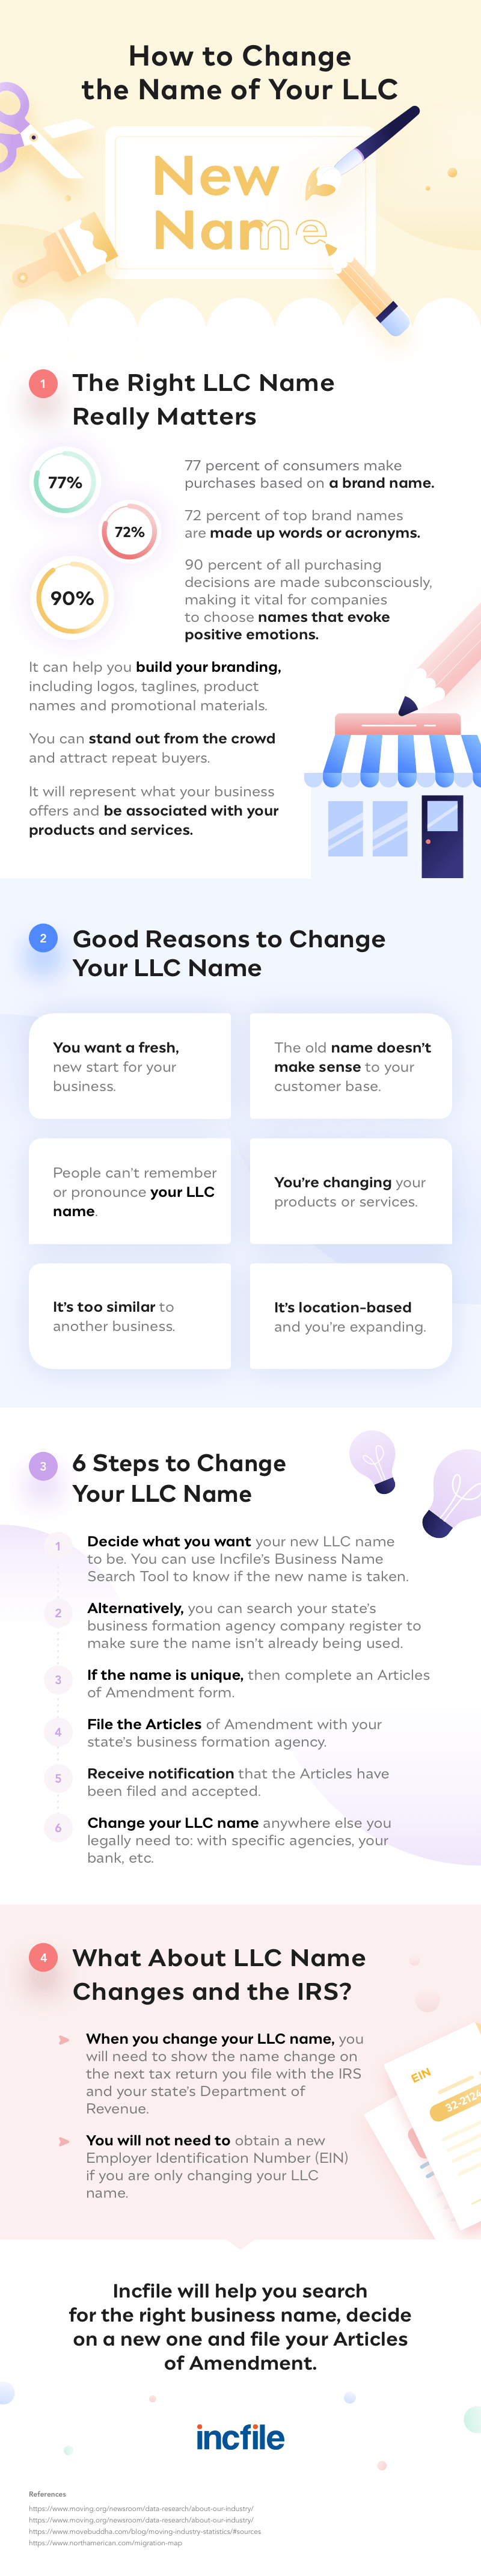 How to Change the Name of Your LLC Infographic